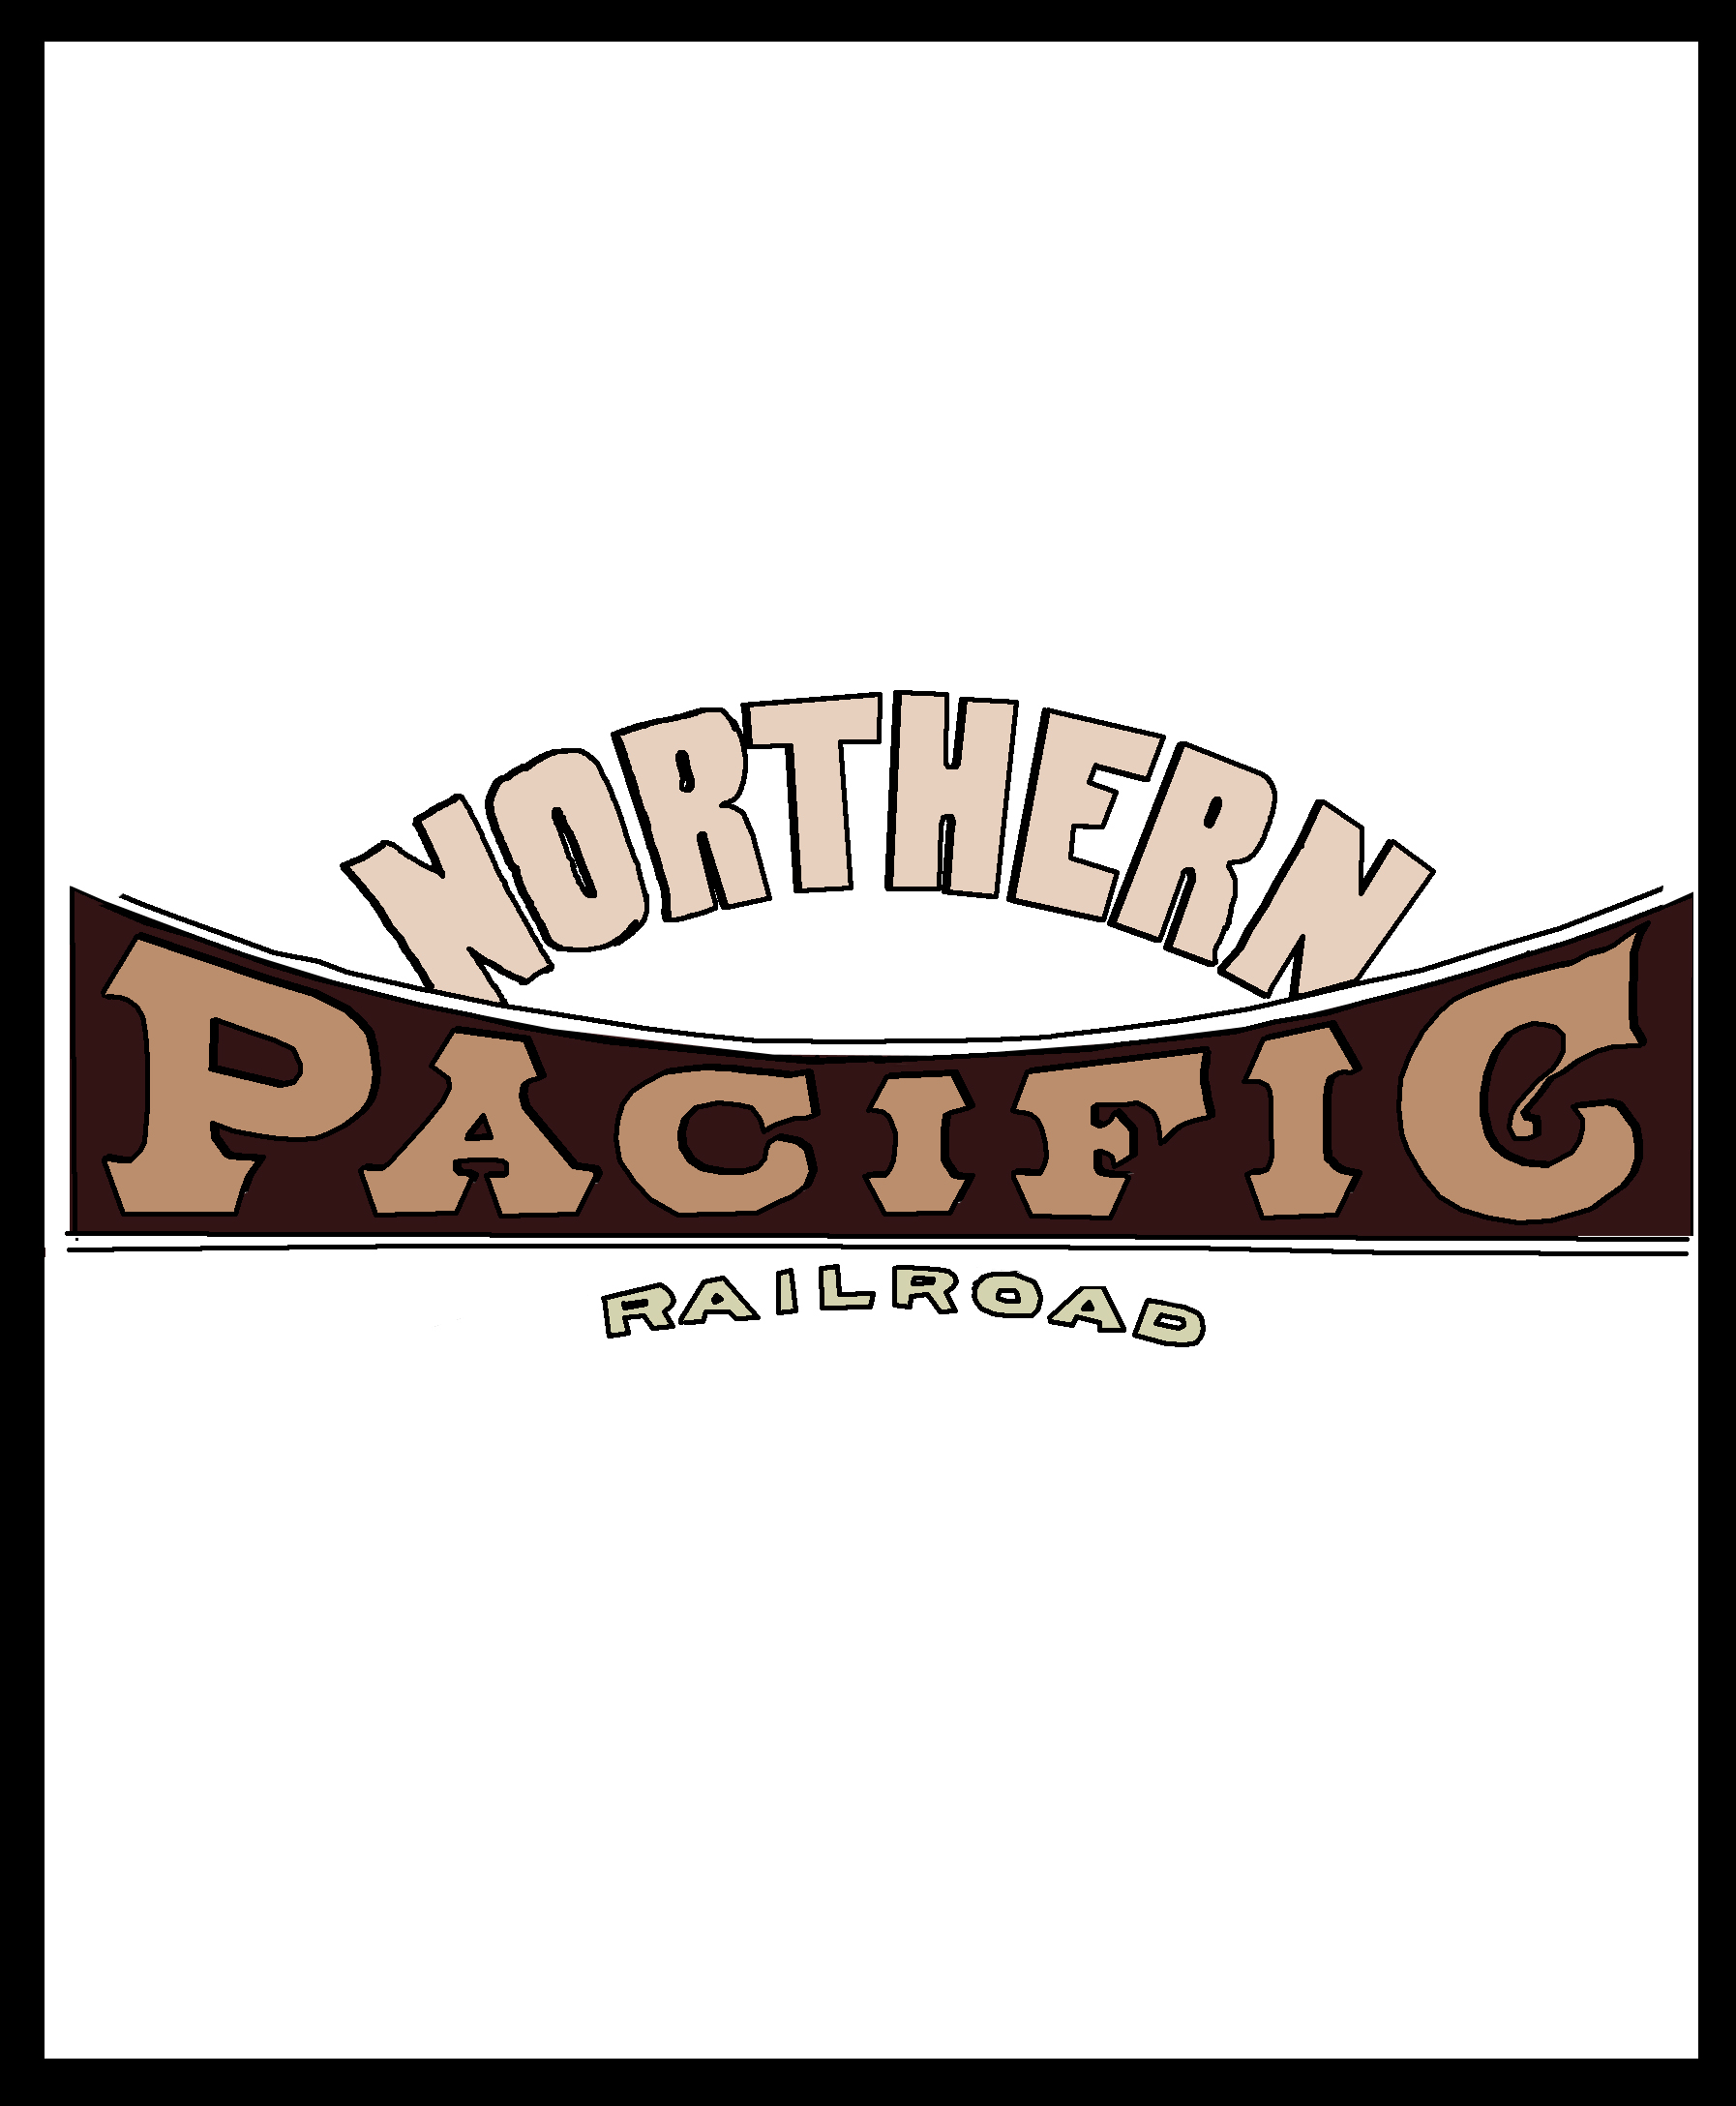 Northern Pacific Railroad (Marco T)